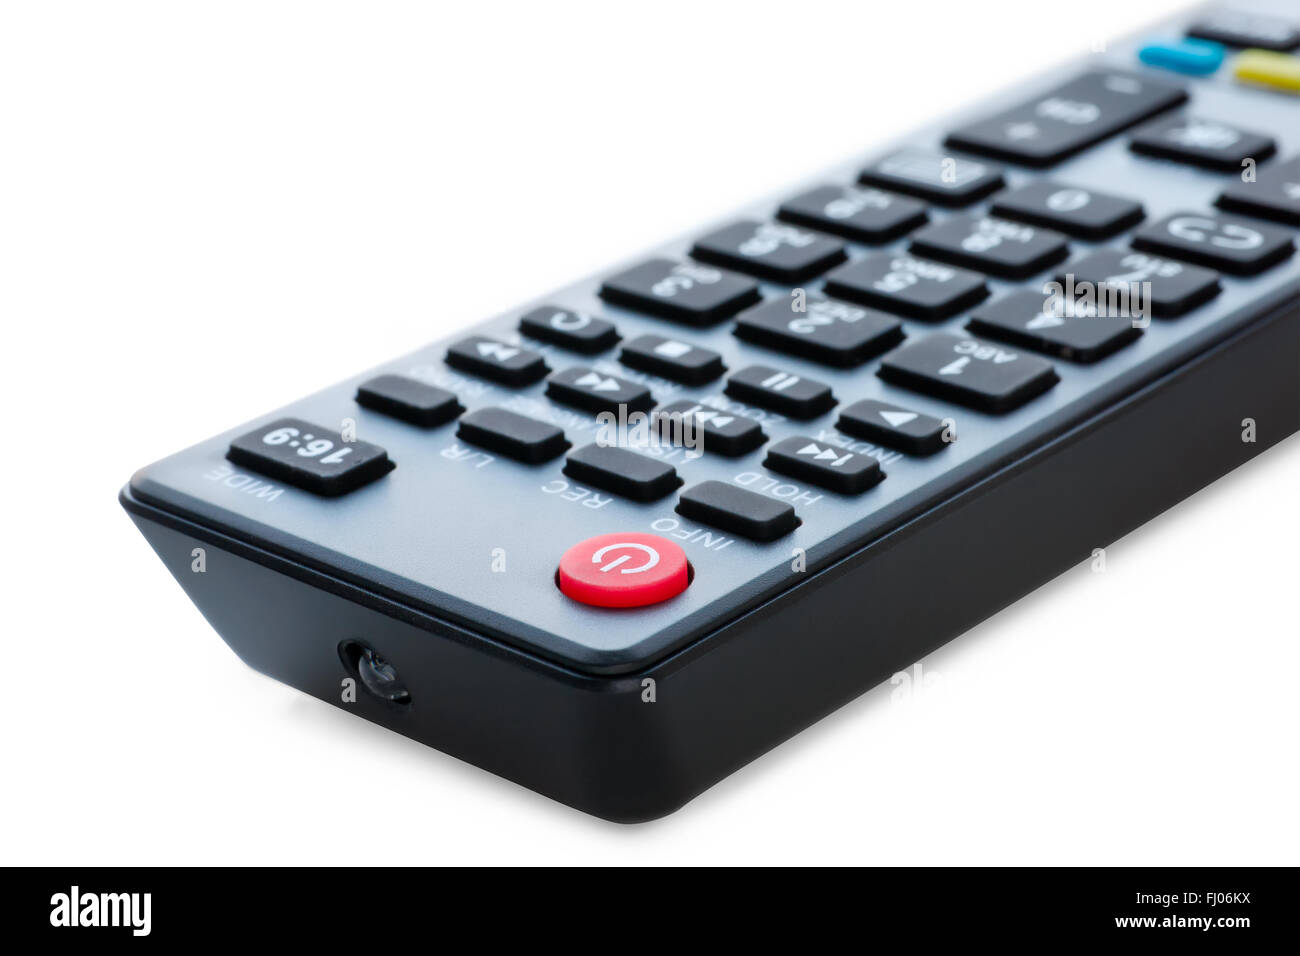 https://c8.alamy.com/comp/FJ06KX/focus-on-the-red-power-button-of-tv-remote-control-isolated-on-white-FJ06KX.jpg